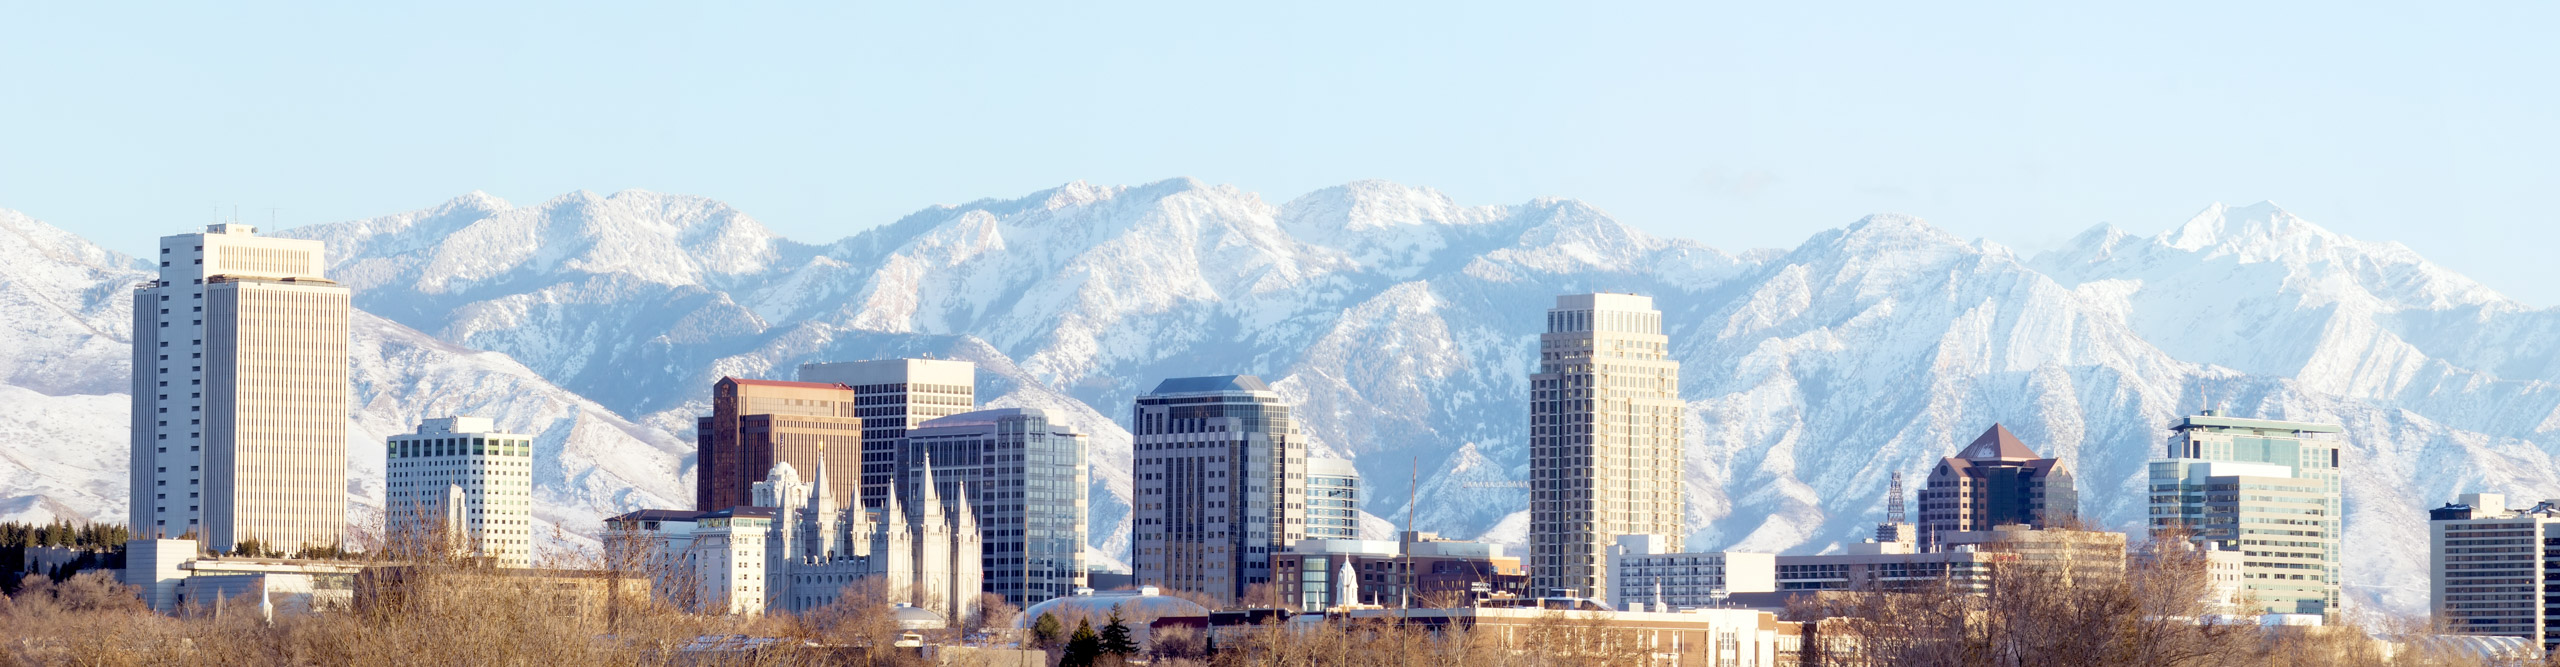 Salt Lake City with snowy mountains in the distance on a clear sunny day, Utah, USA